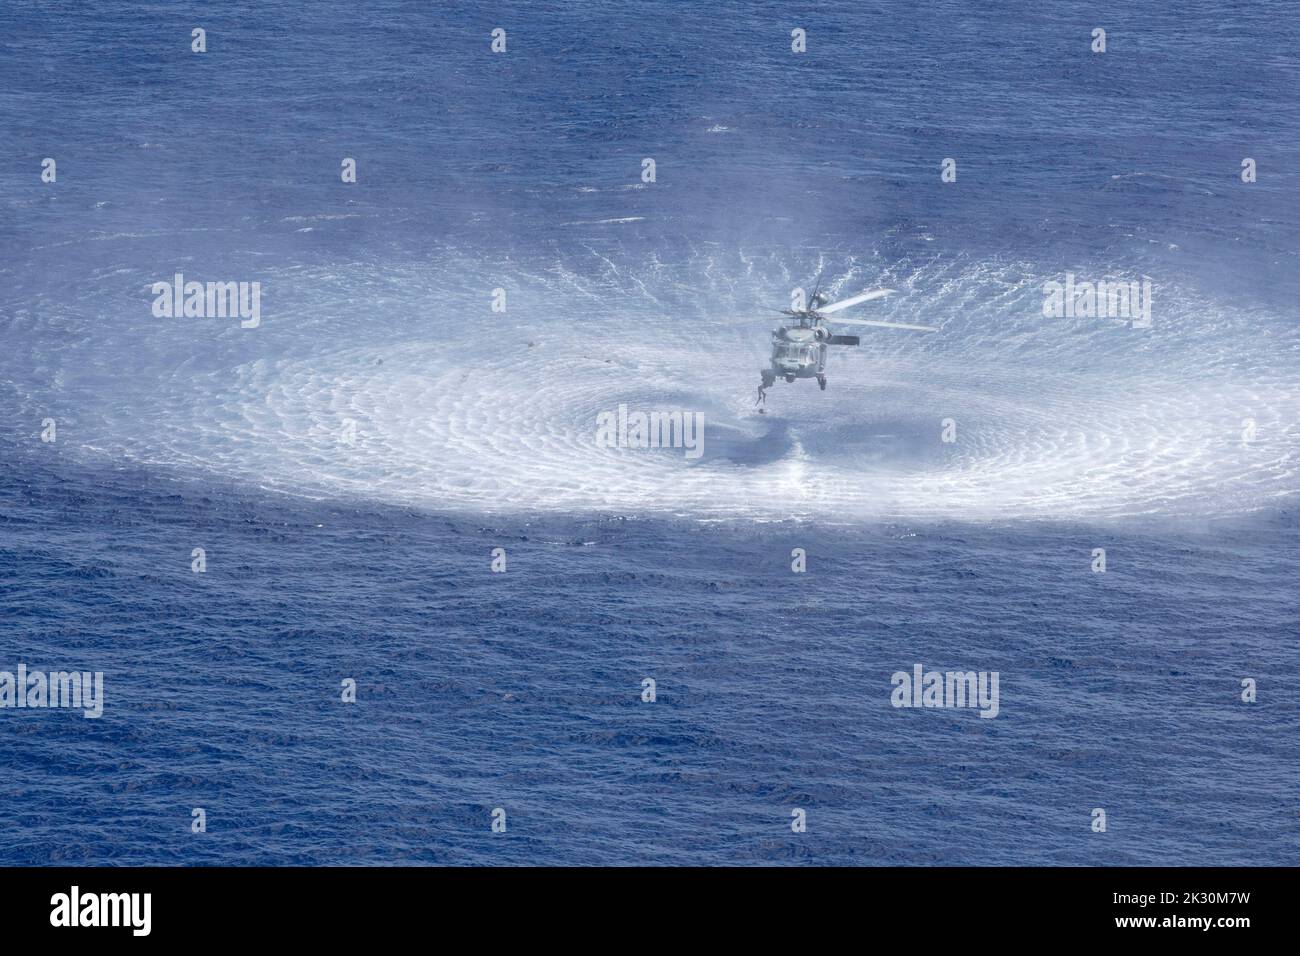 220922-N-XN177-1815 PHILIPPINE SEA (Sept. 22, 2022) – A naval air crewman jumps from an MH-60S Sea Hawk helicopter assigned to Helicopter Sea Combat Squadron (HSC) 23 during a search and rescue (SAR) swimmer training evolution Sept. 22, 2022. HSC-23 is embarked aboard amphibious assault carrier USS Tripoli (LHA 7). Tripoli is operating in the U.S. 7th Fleet area of operations to enhance interoperability with allies and partners and serve as a ready response force to defend peace and maintain stability in the Indo-Pacific region.  (U.S. Navy photo by Mass Communication Specialist 1st Class Pete Stock Photo